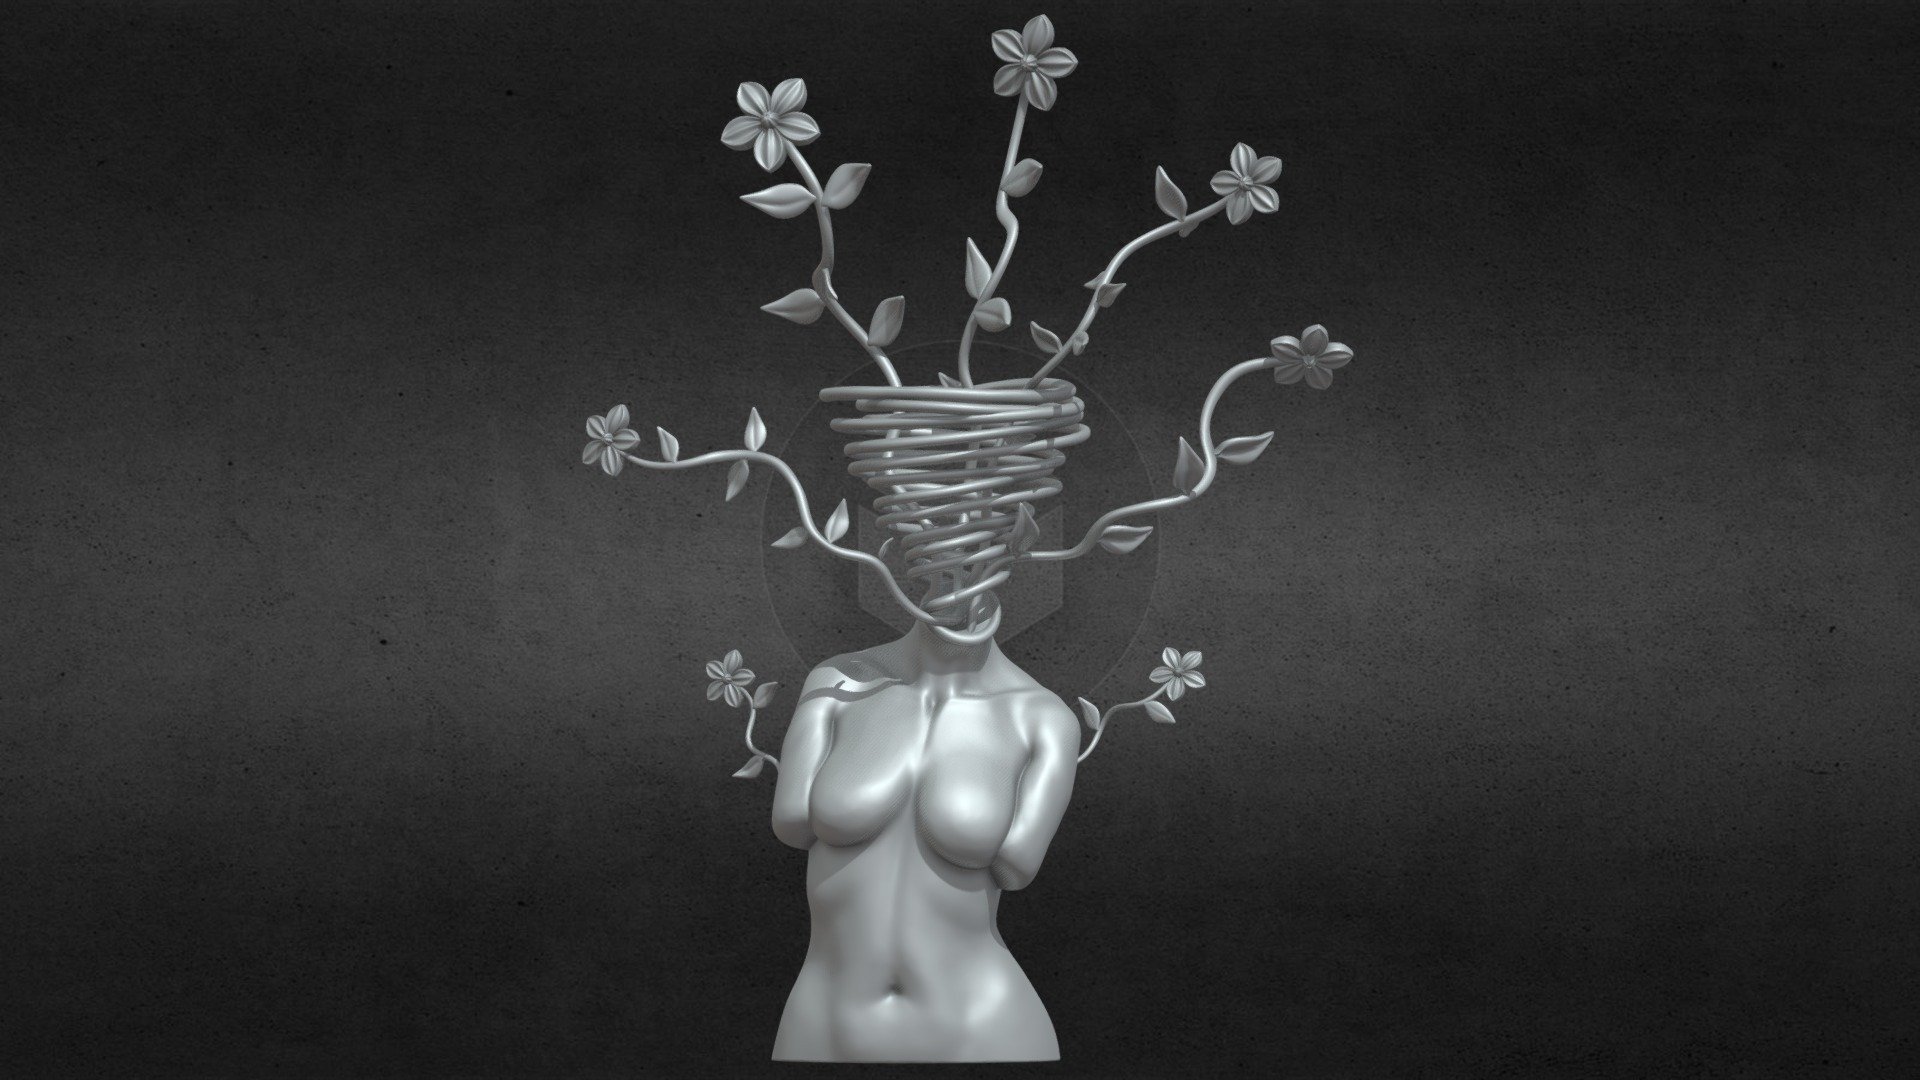 Female body with flowers for home decor, bedroom, bookshelf. I put a photo highlighting the slt files in different colors, each flower is a different stl. However I also include OBJ files, Zbrush Tool, FBX. You will have my support after the sale if you need it 3d model